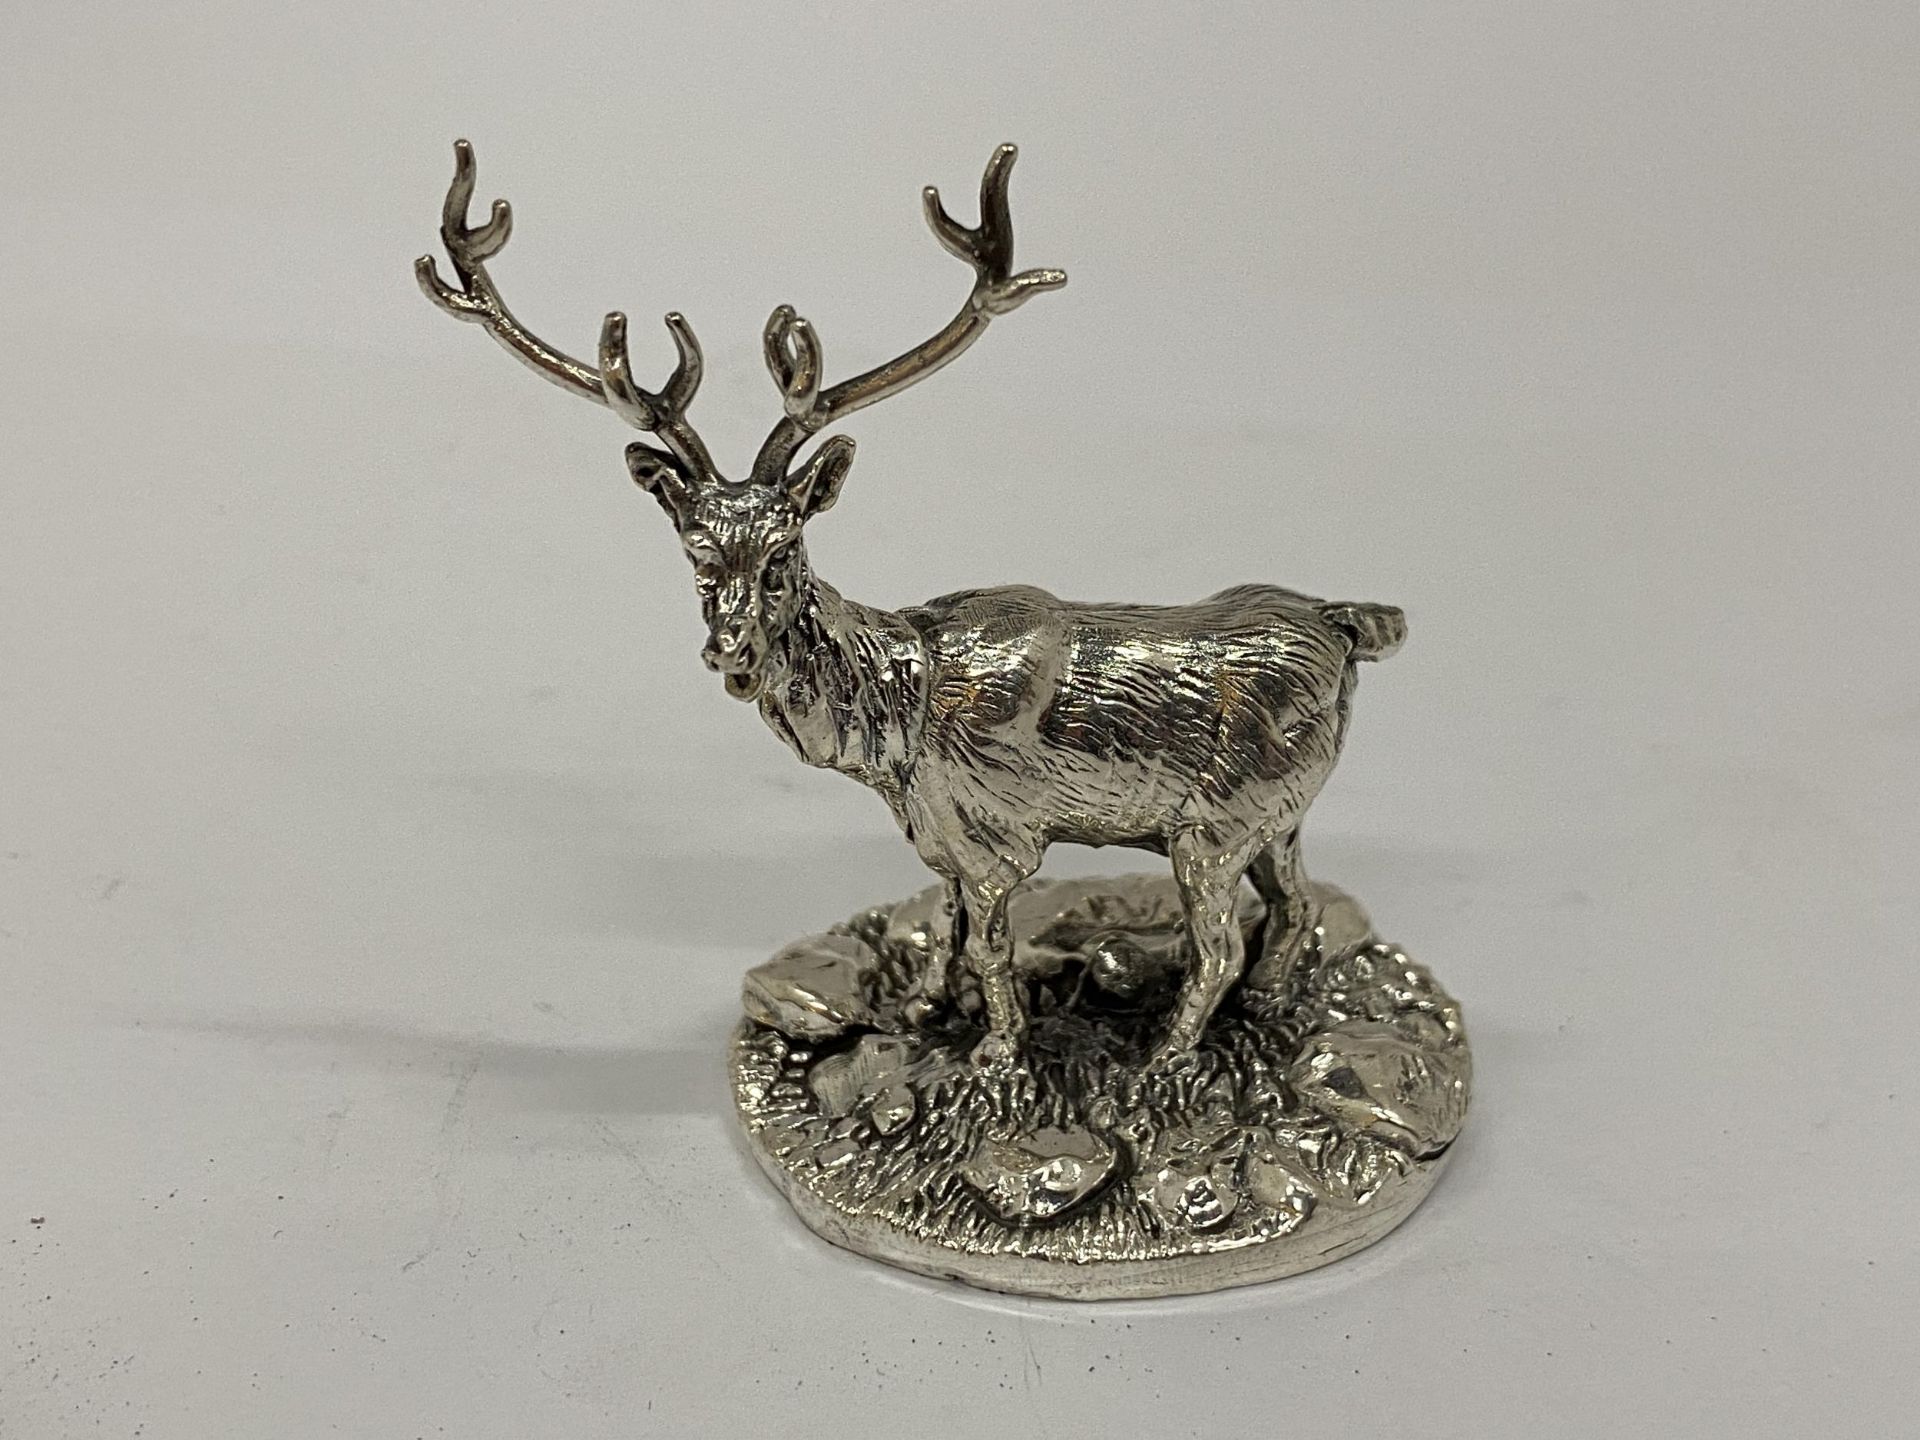 A HALLMARKED SILVER FILLED CAMELOT SILVERWARE LTD STAG FIGURE